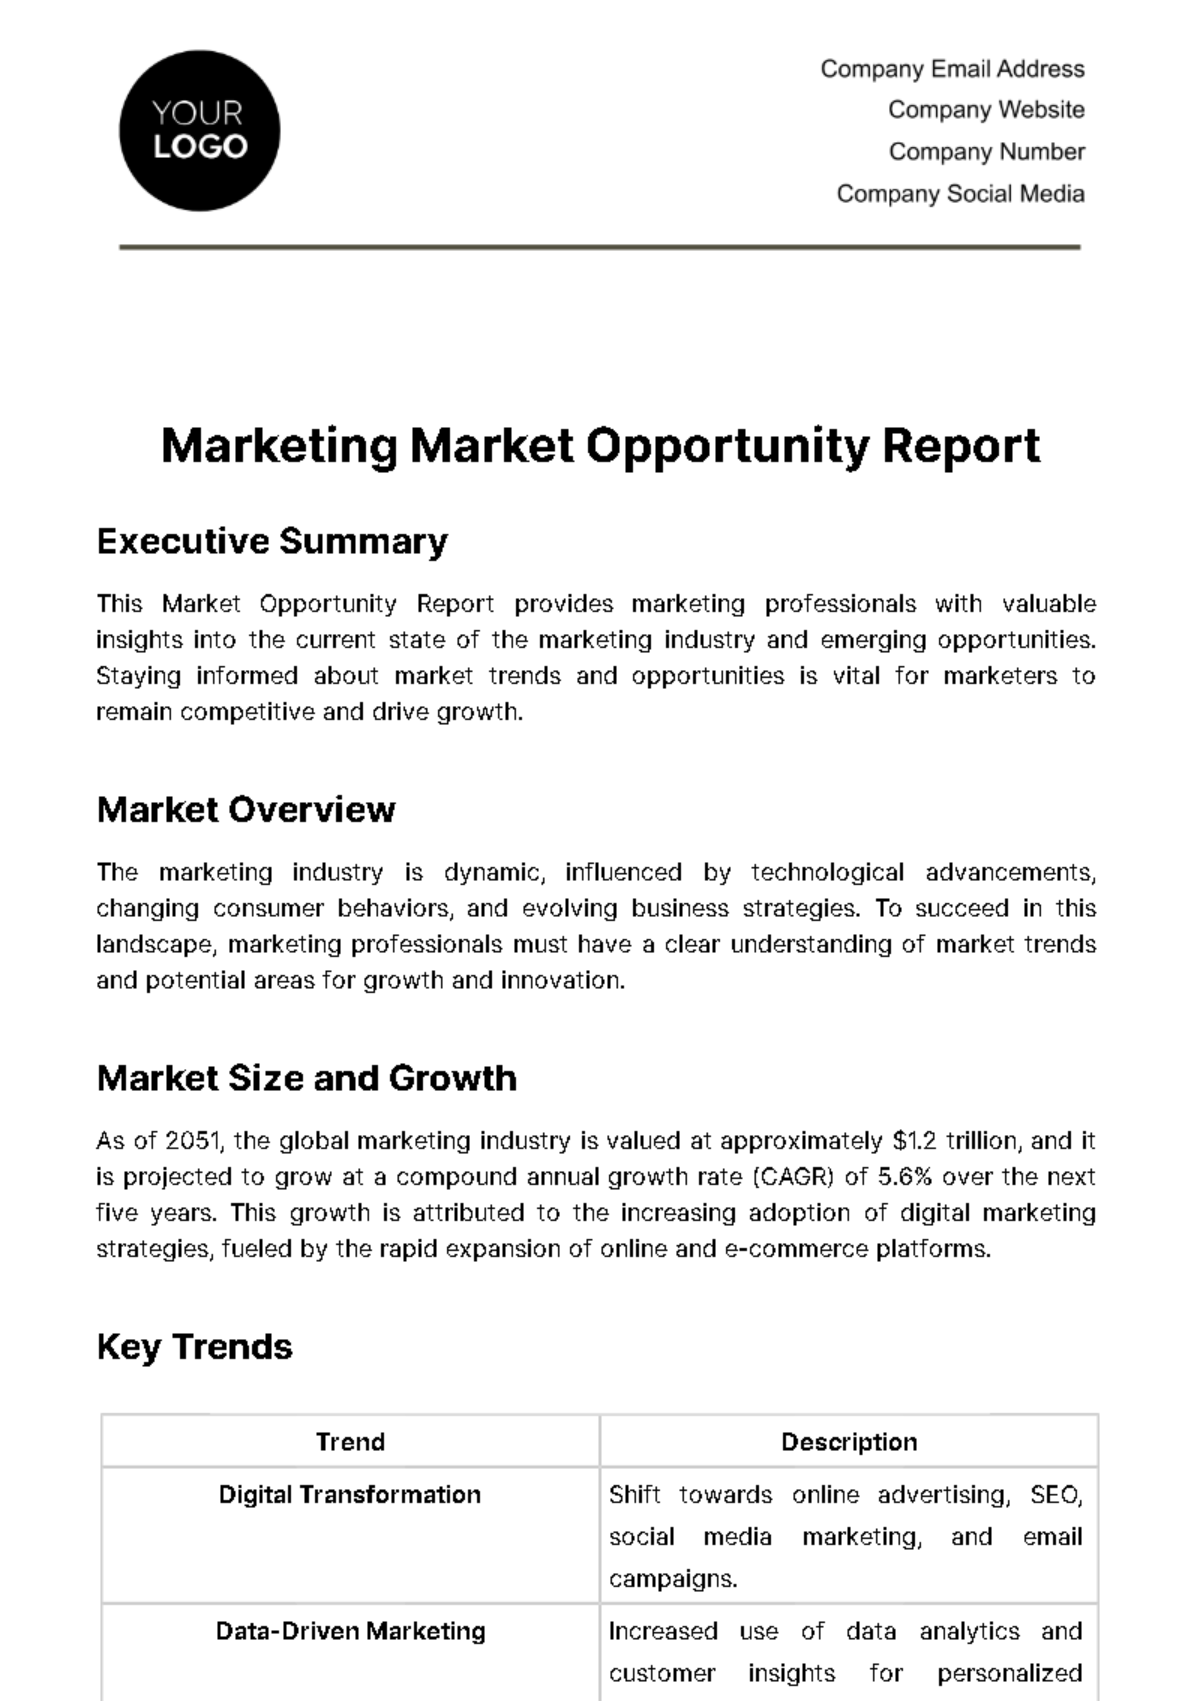 Free Marketing Market Opportunity Report Template